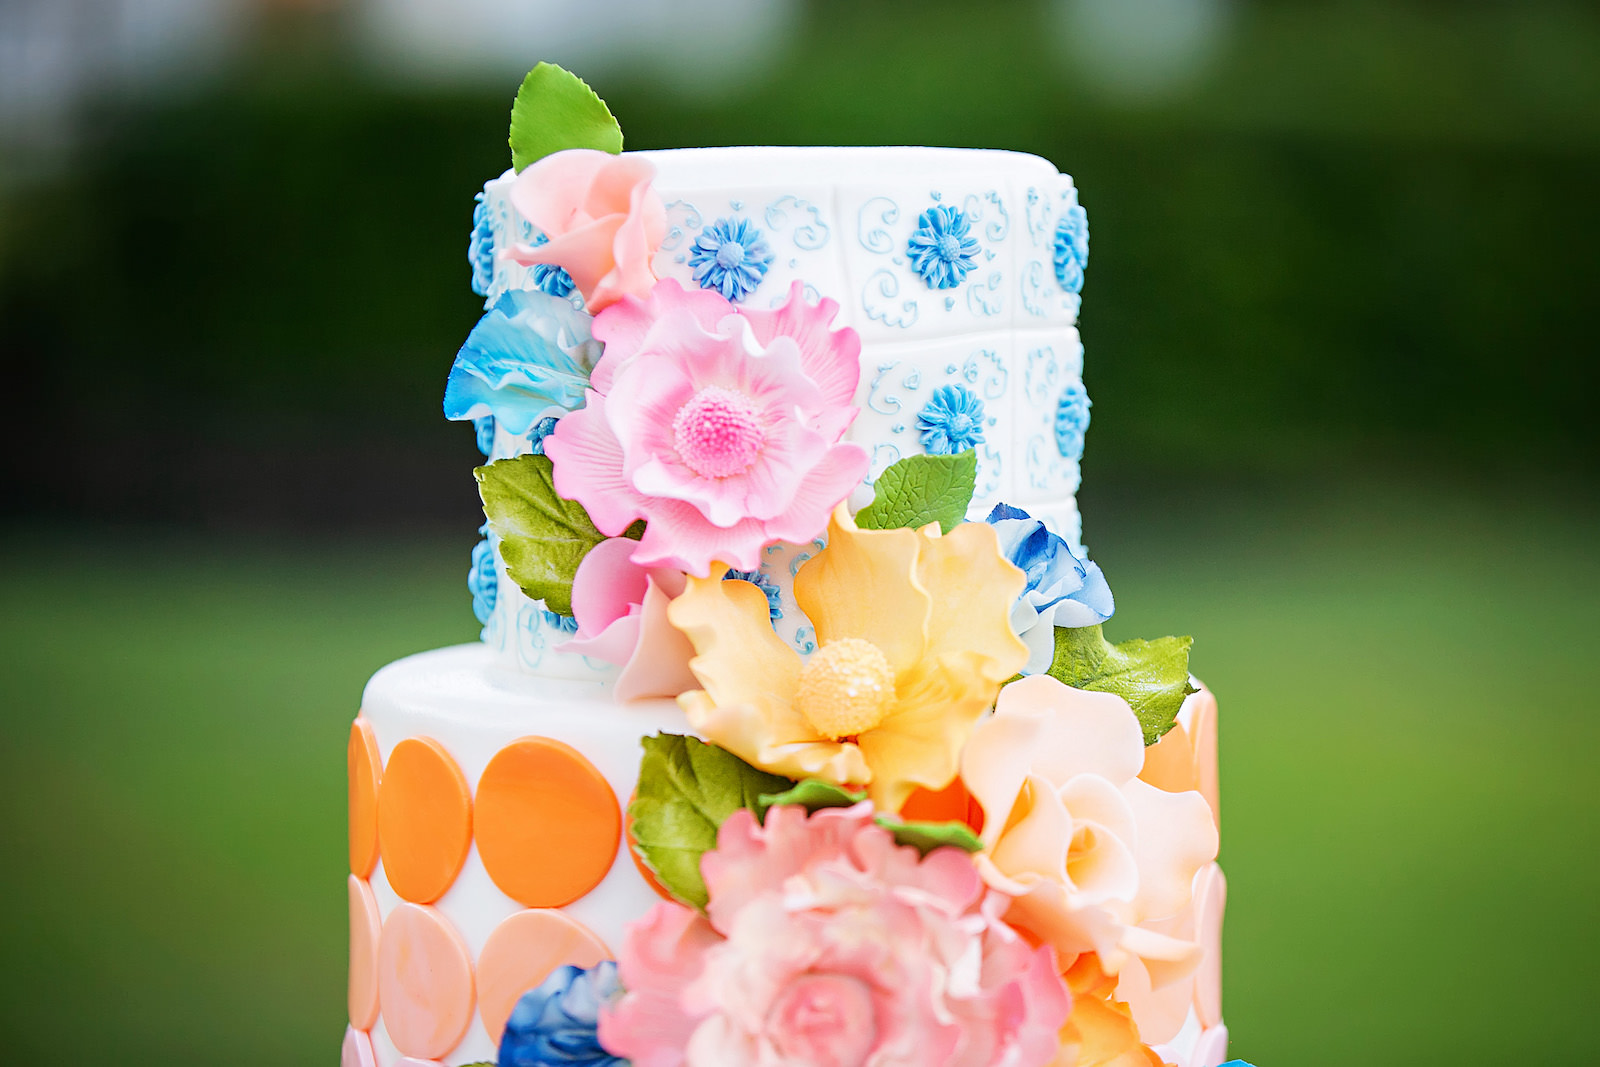 Three Tier Bright and Vibrant Floral Cake with Blue, Orange, and Pink Detailing